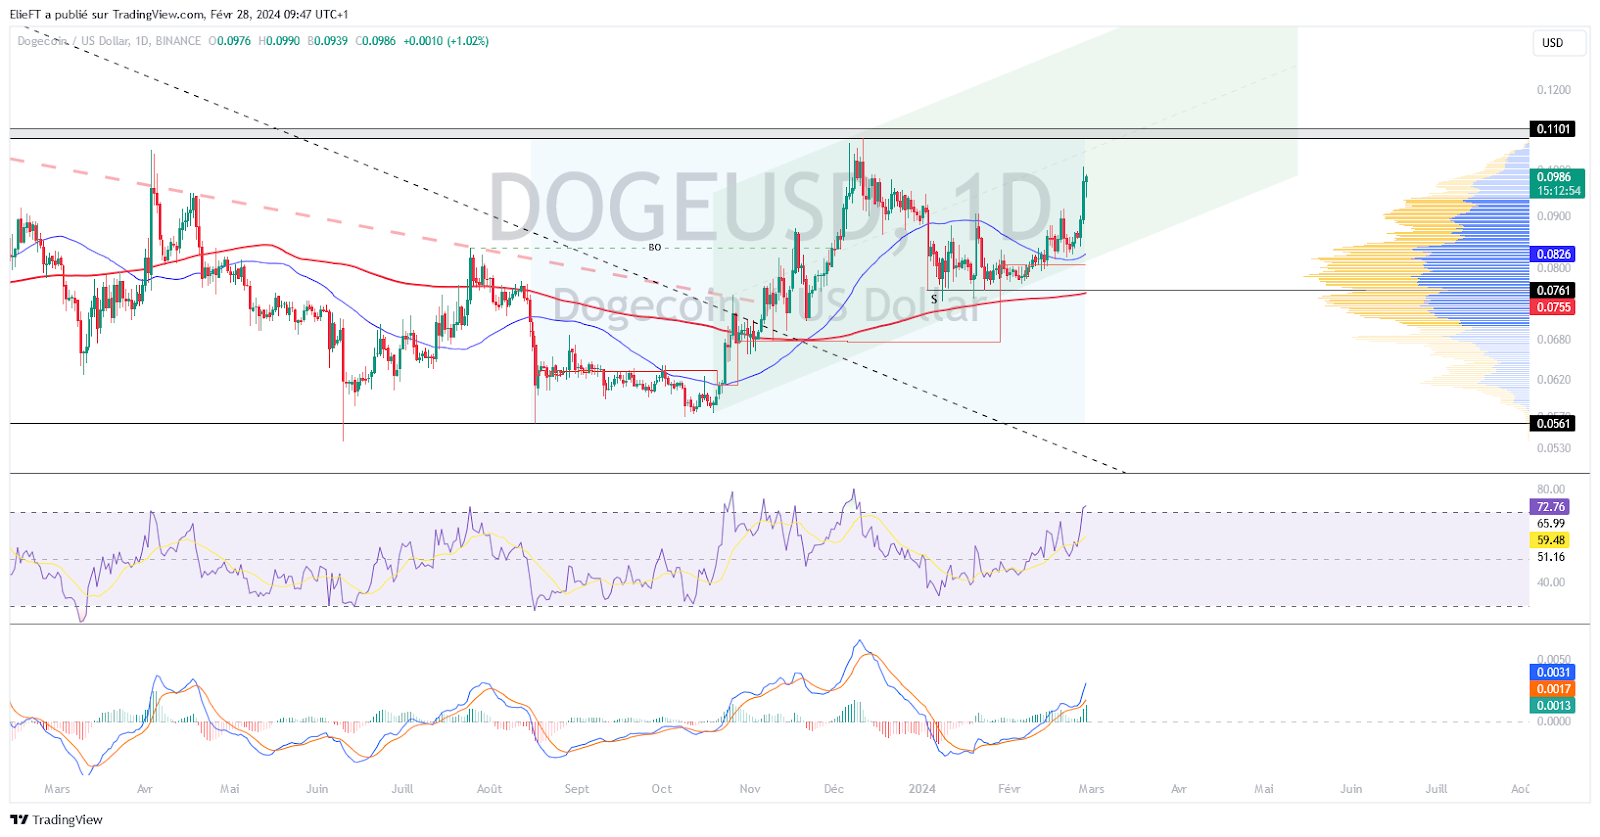 DOGE/USD Daily Chart